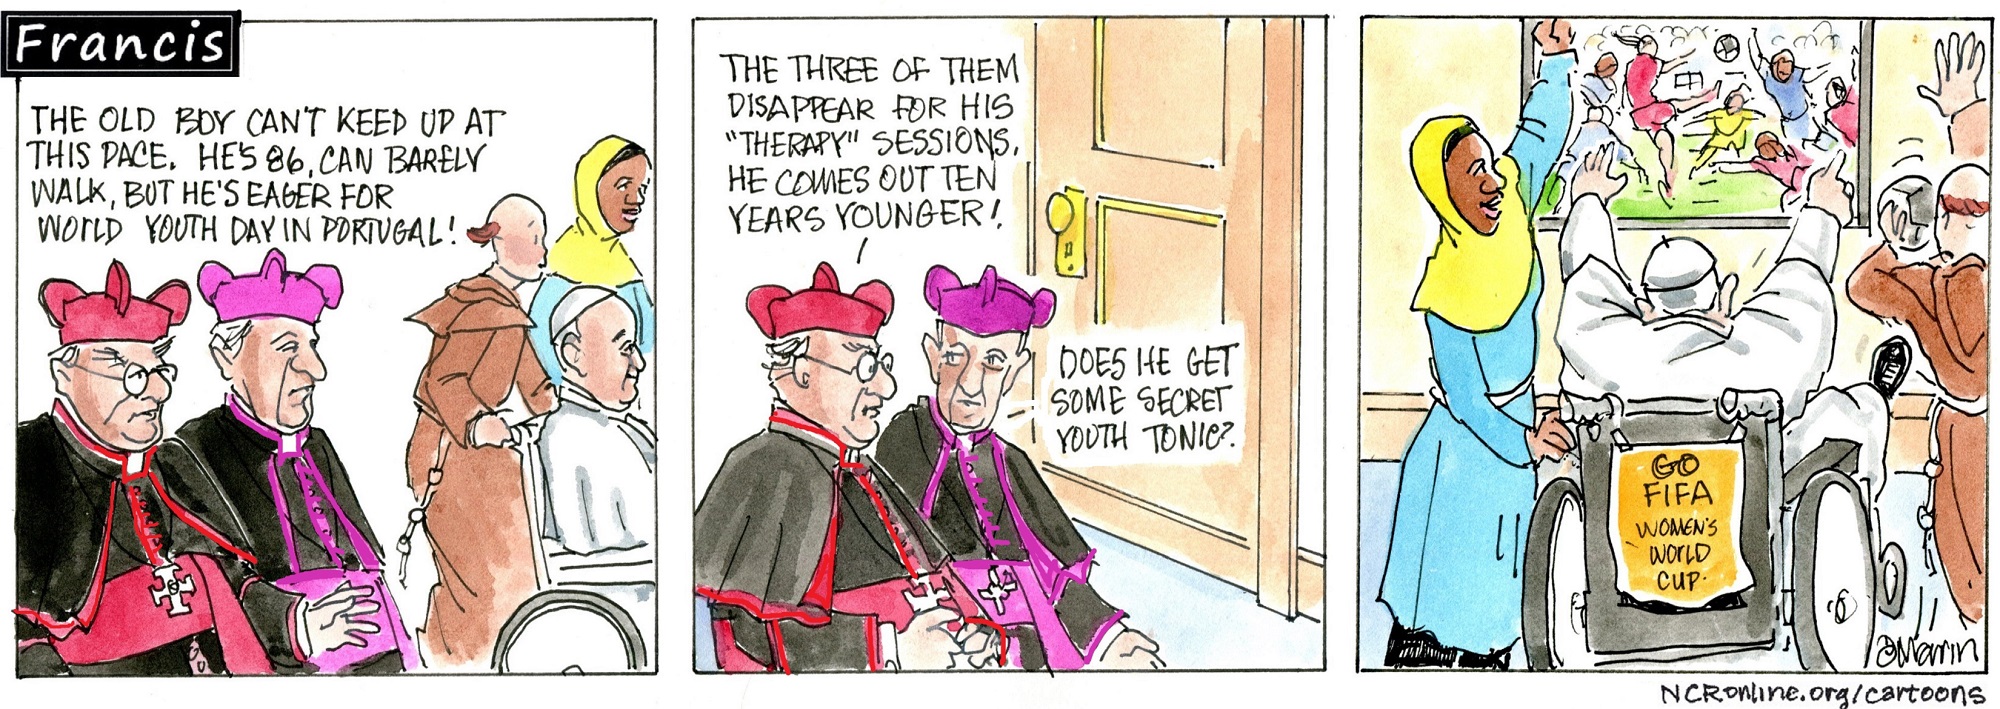 Francis, the comic strip: Does Francis have some kind of secret youth tonic?